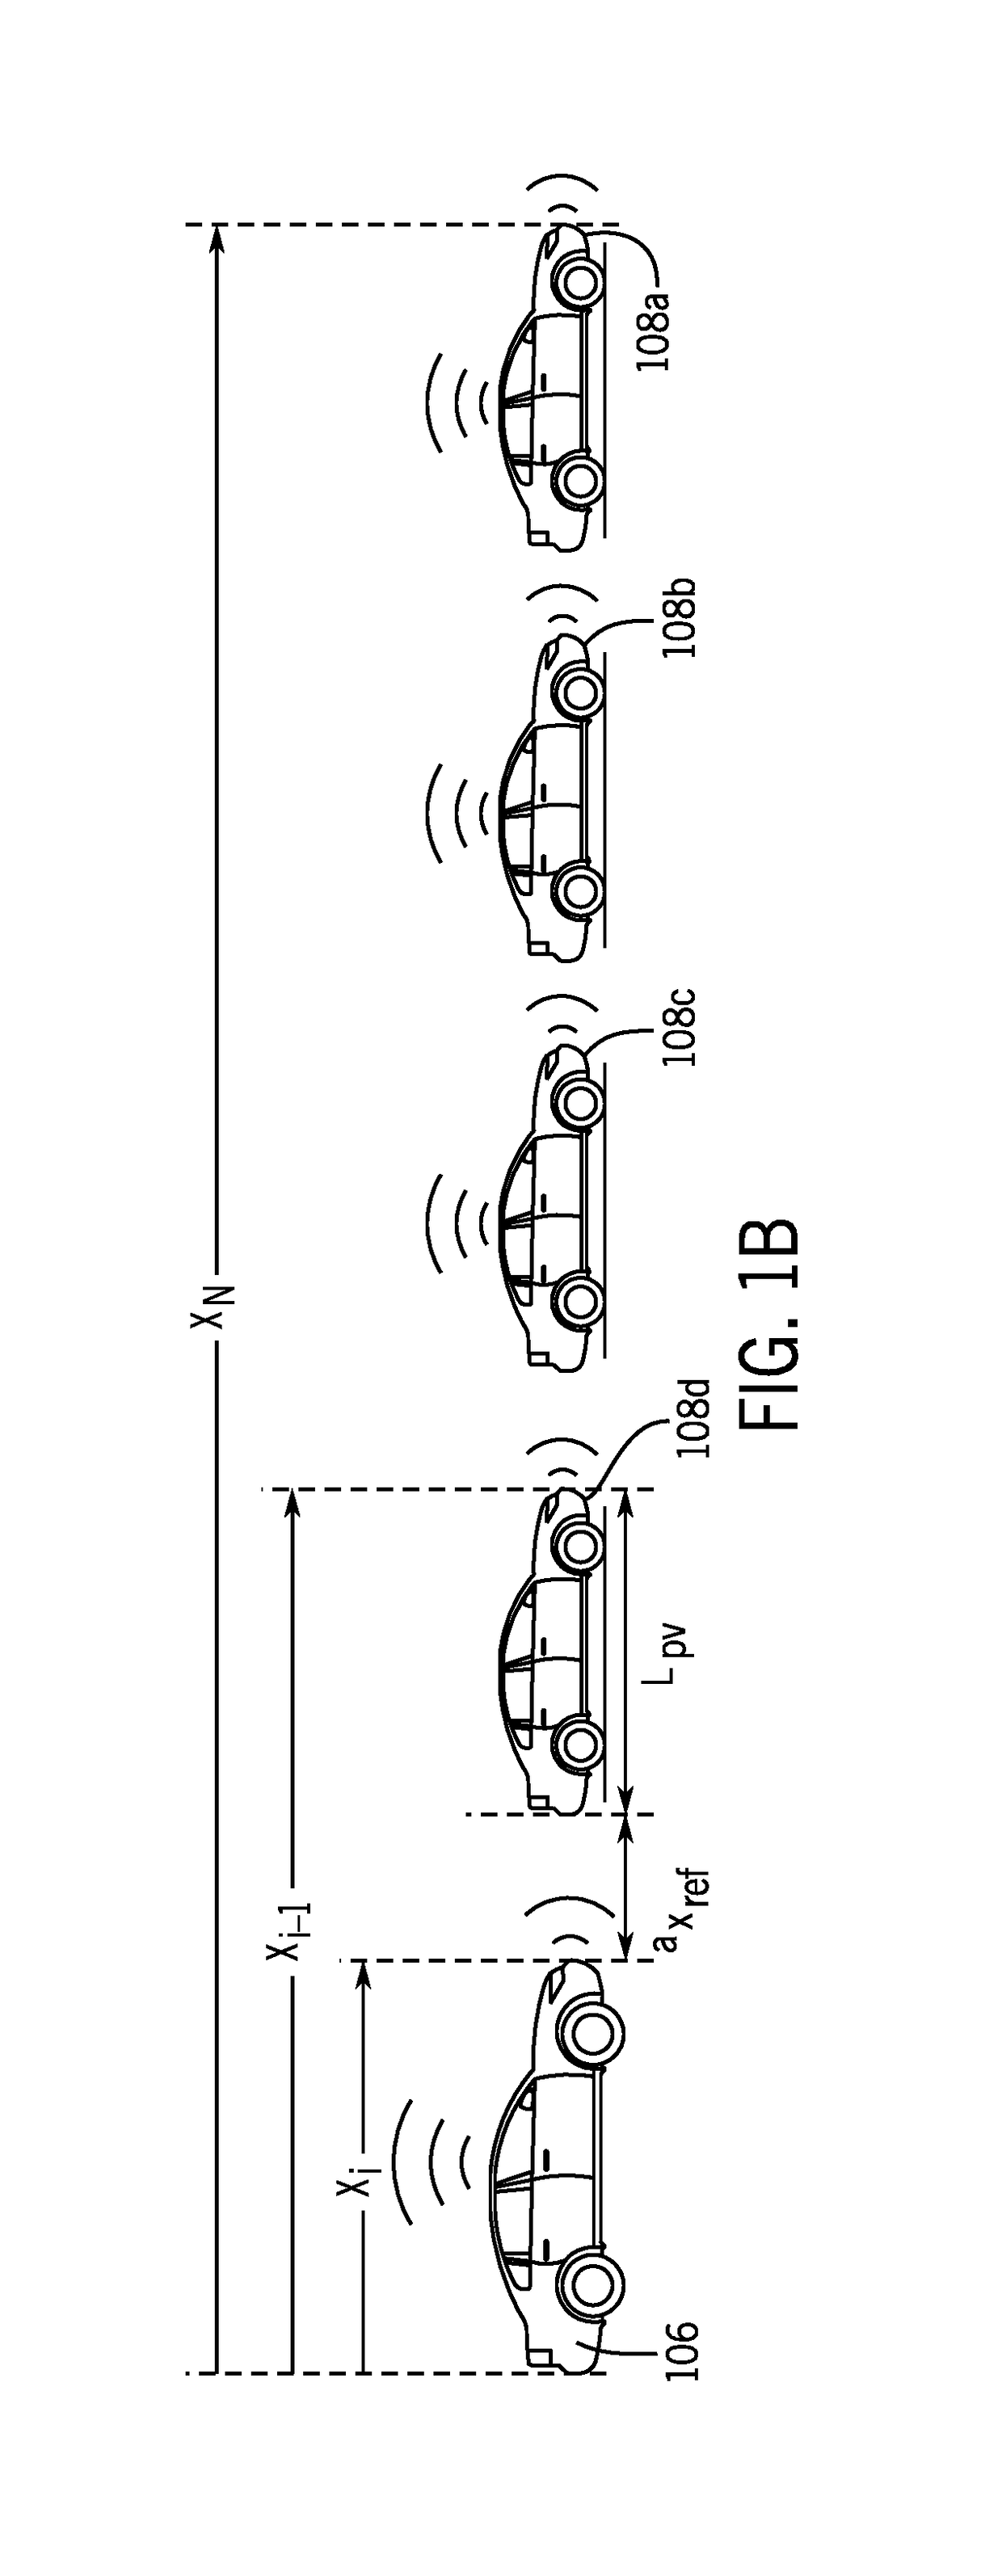 System and method for vehicle control using vehicular communication